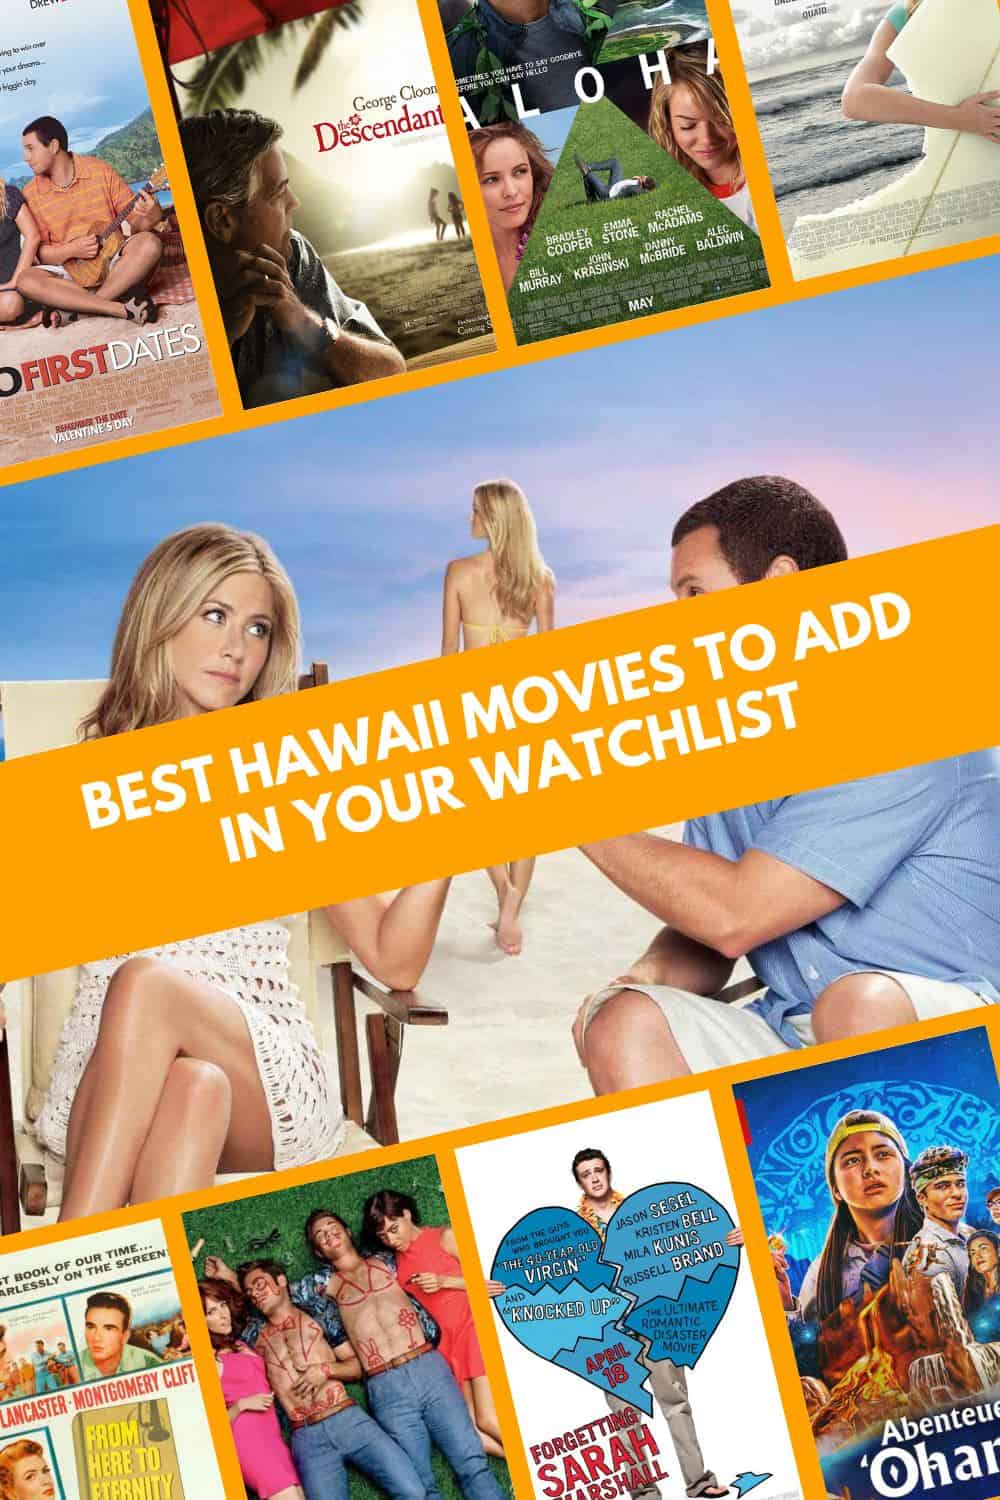 Hawaii Movies to Add in Your Watchlist